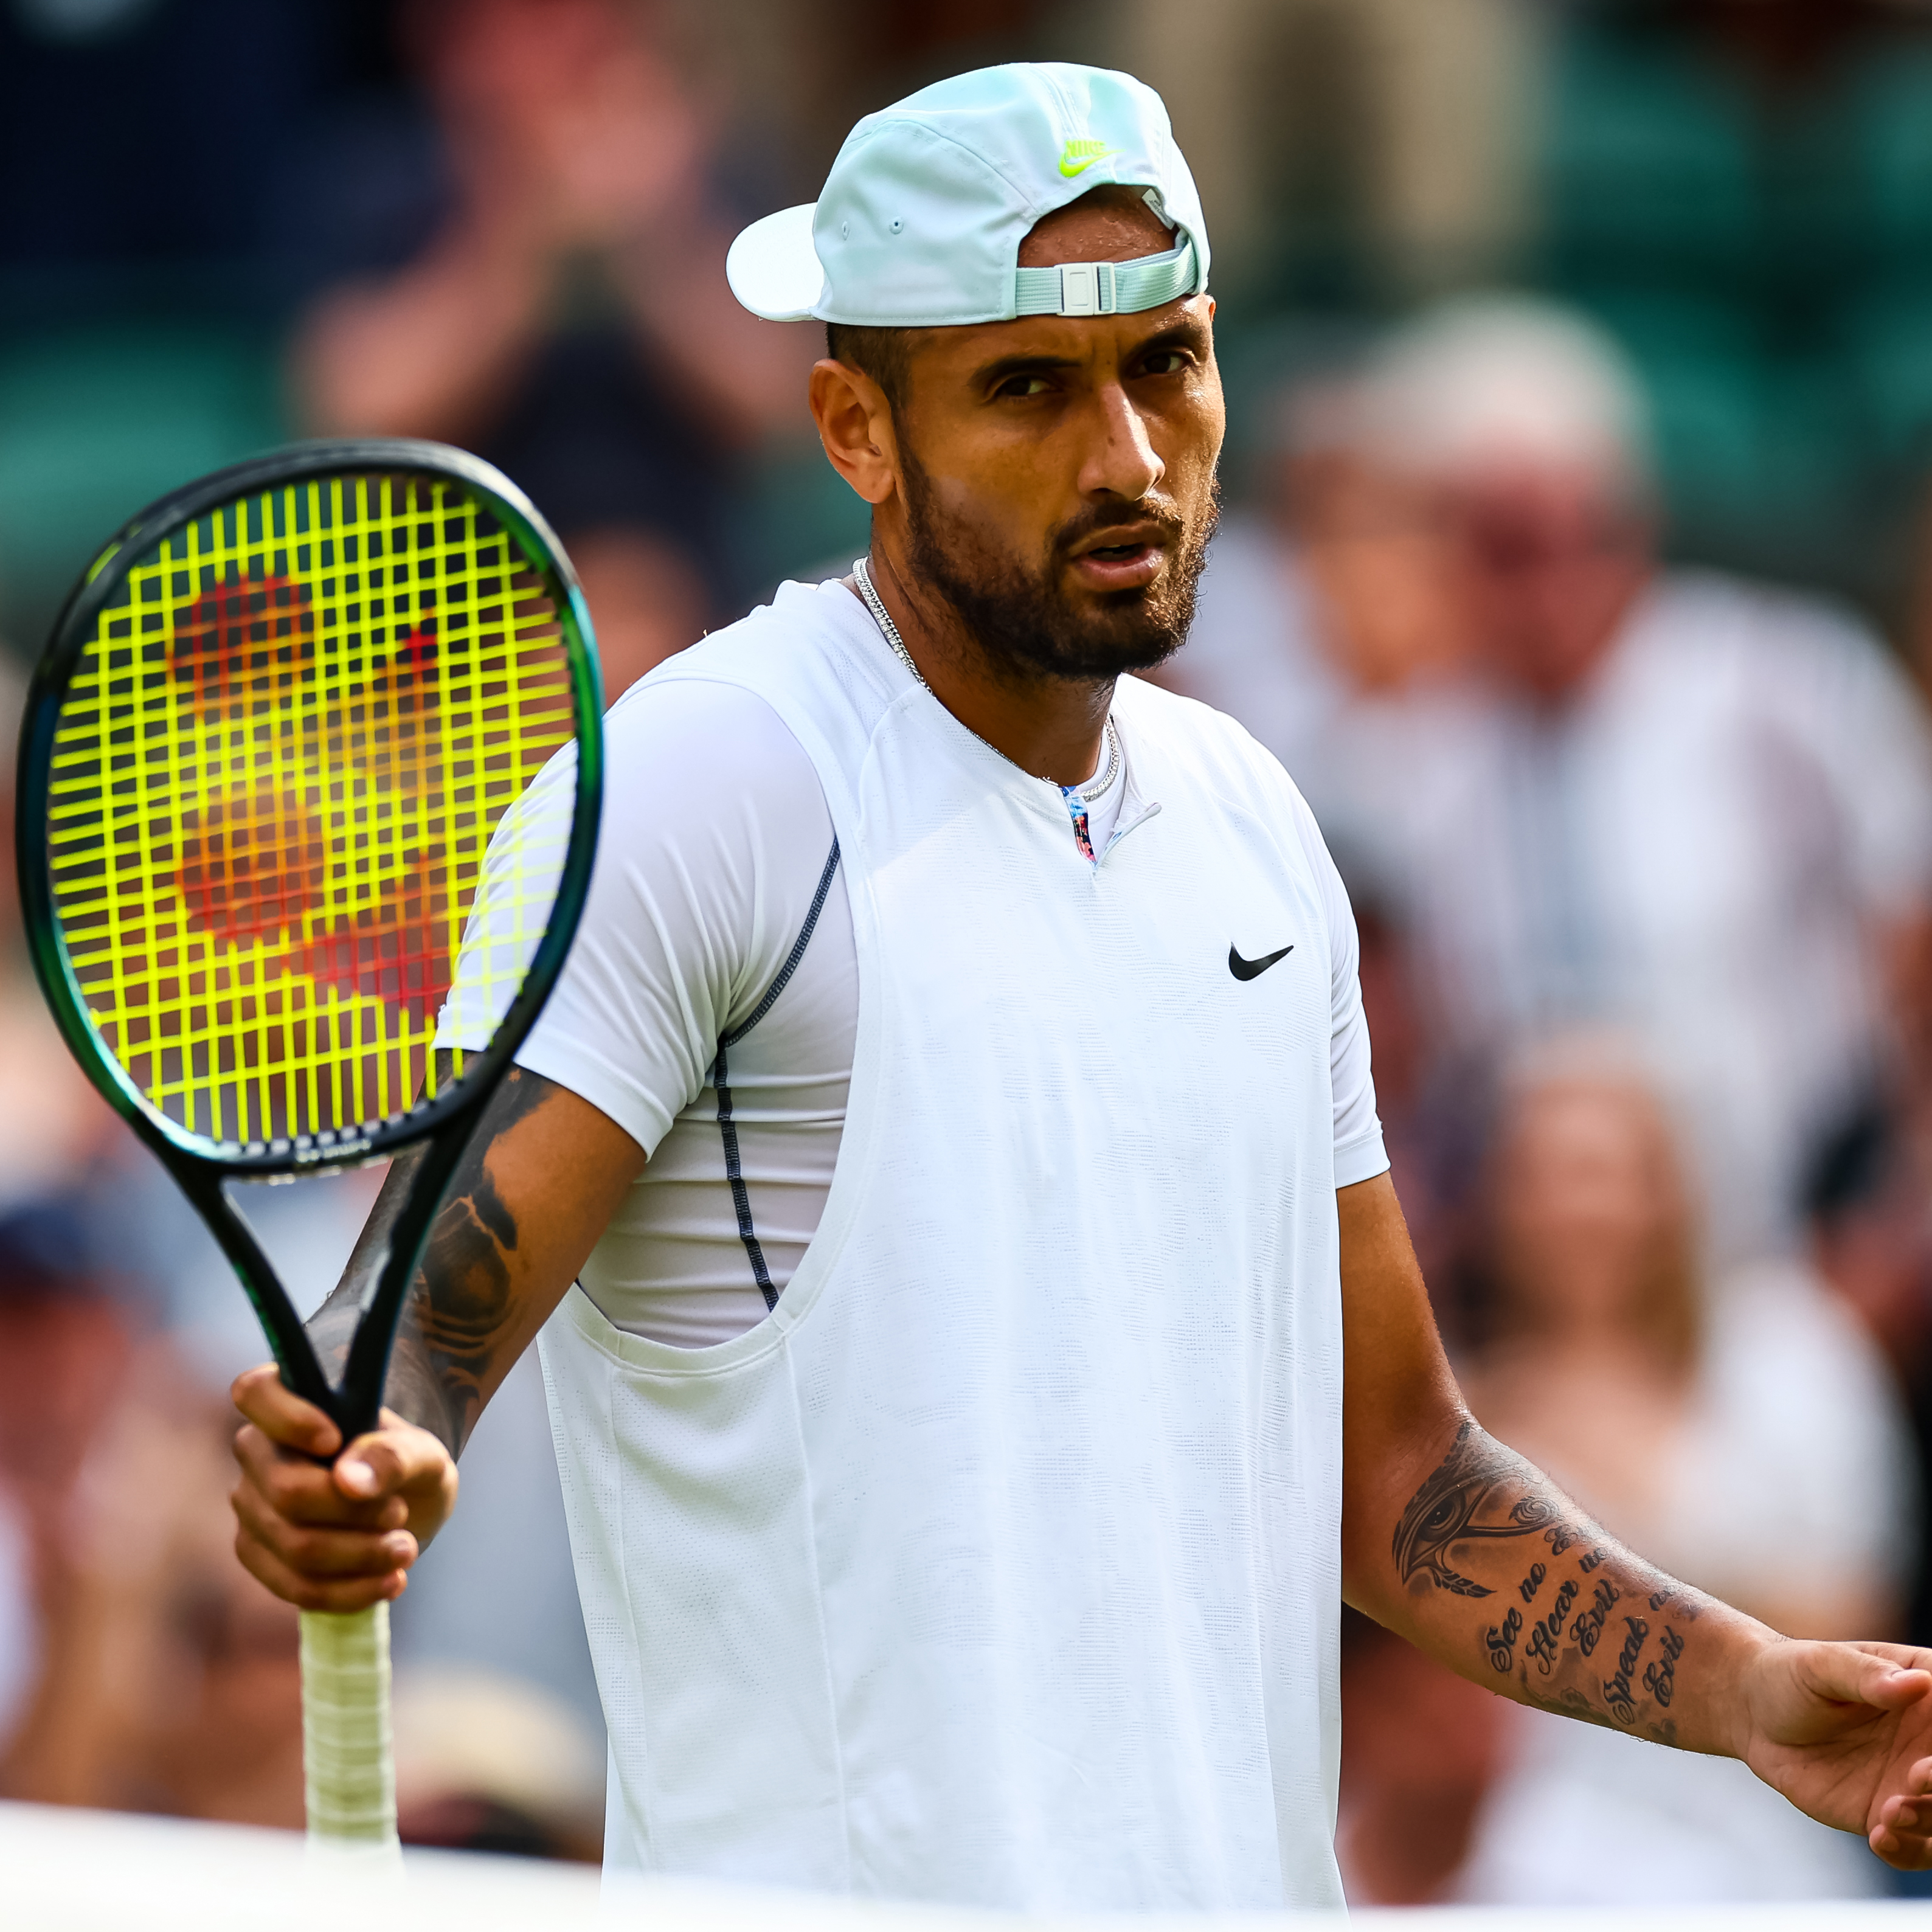 The Rafael Nadal-Nick Kyrgios semifinal is too painful to contemplate for Rafa fans This is the Loop GolfDigest